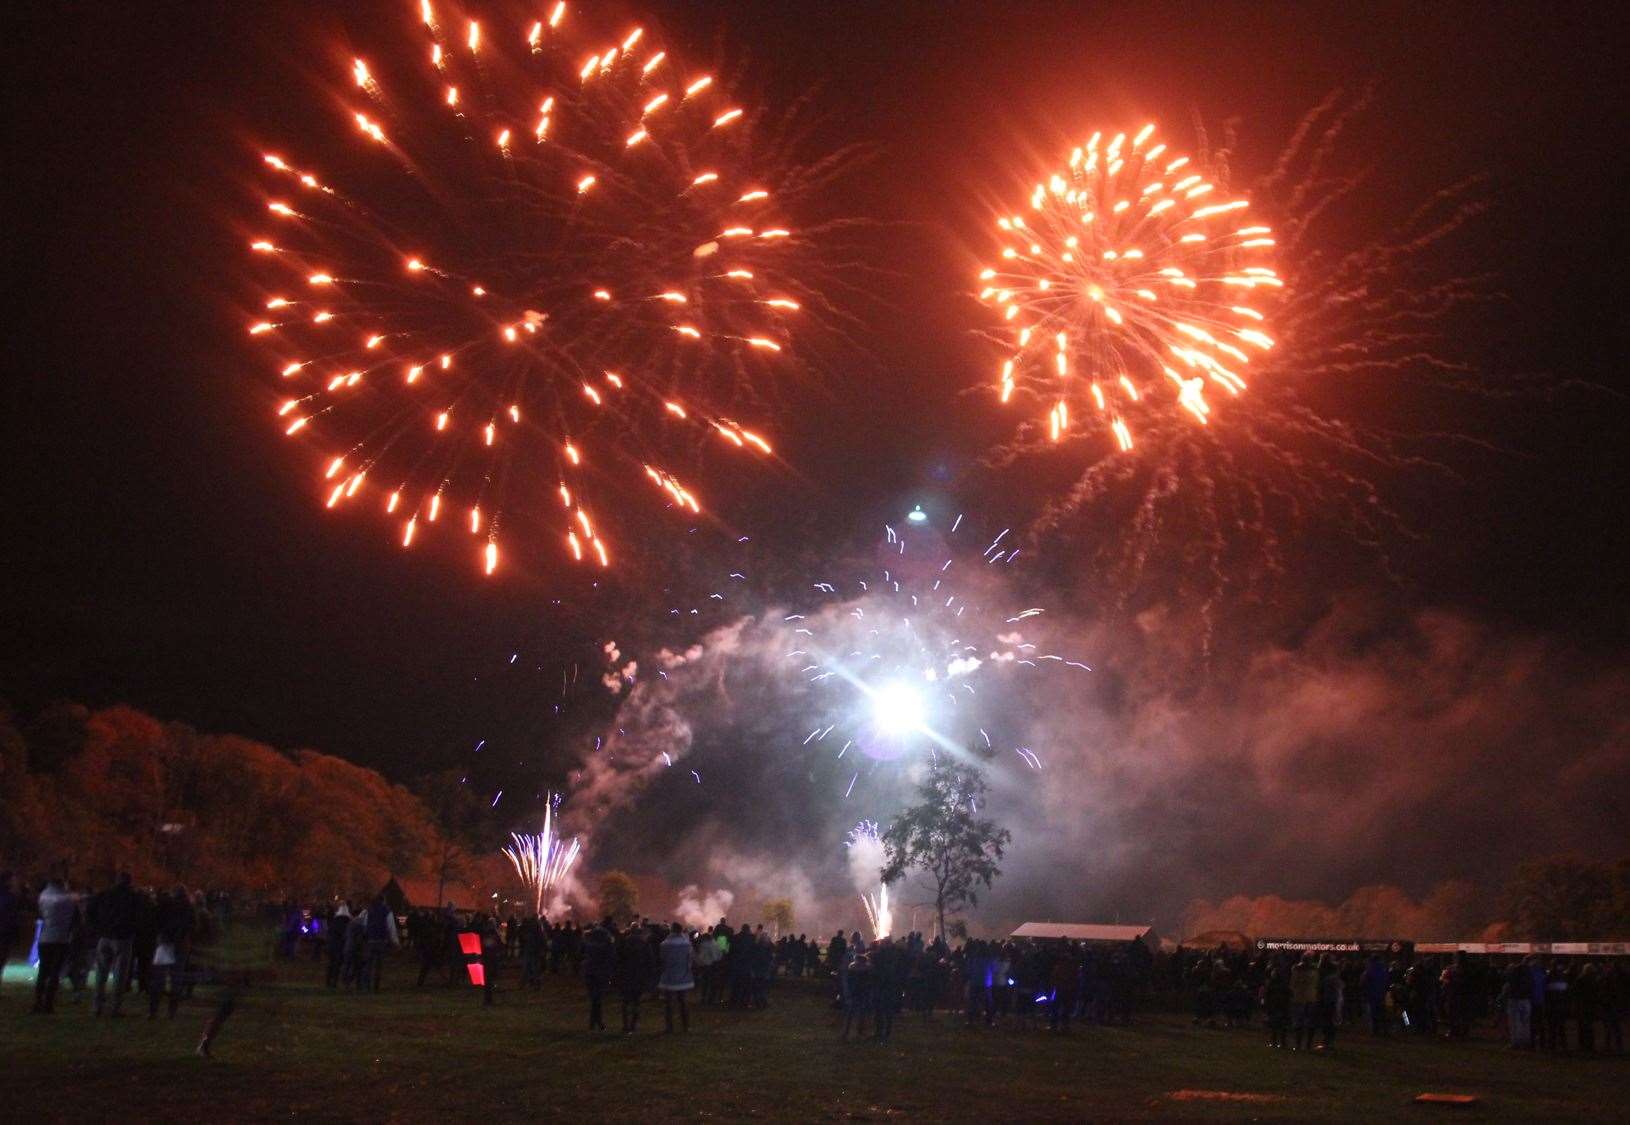 The UCAN fireworks spectacular in Turriff has been postponed.